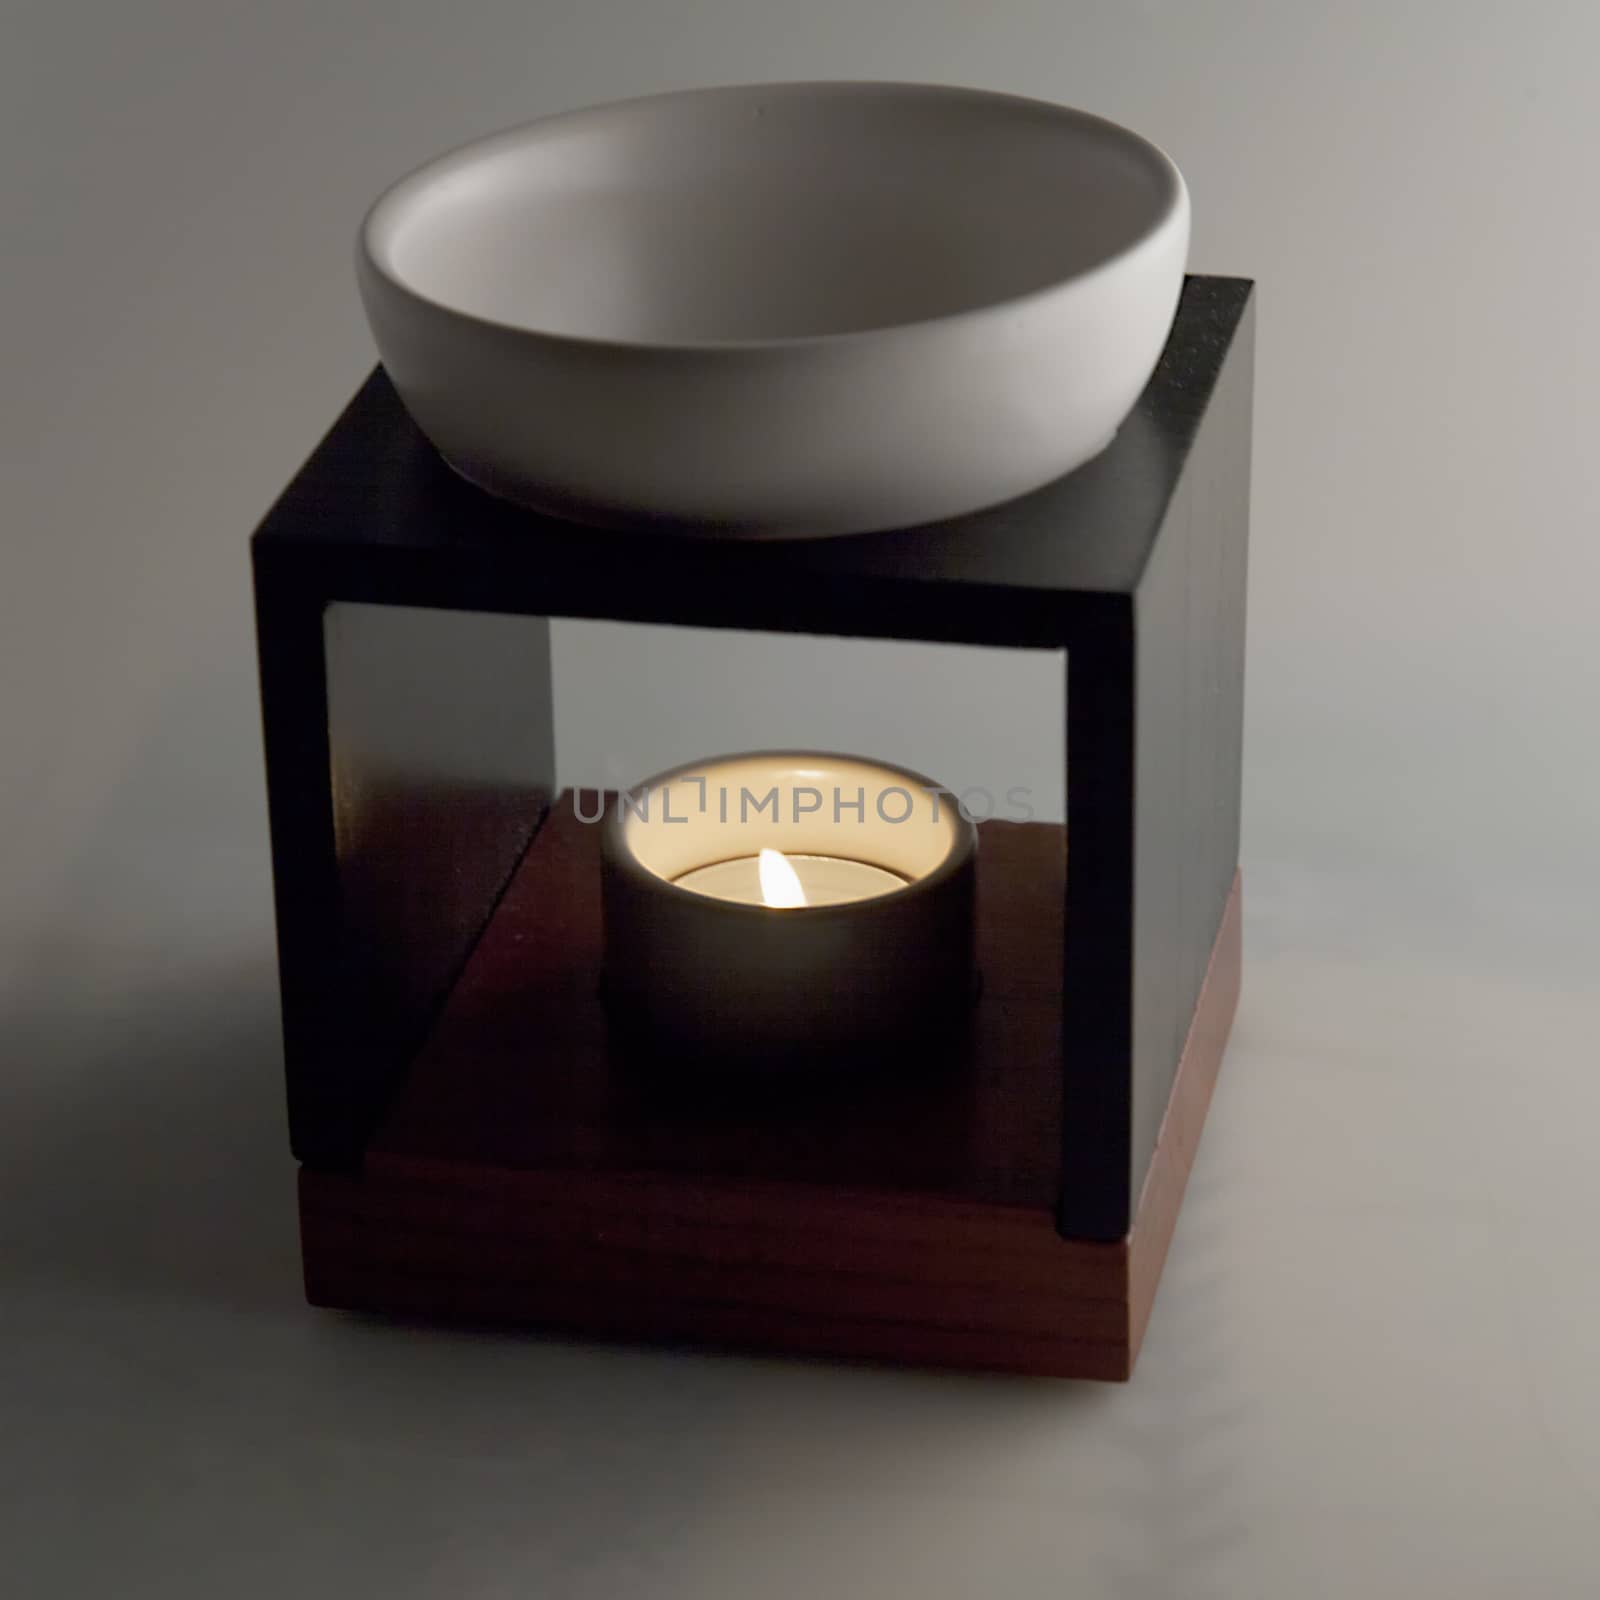 Scent diffuser by Koufax73